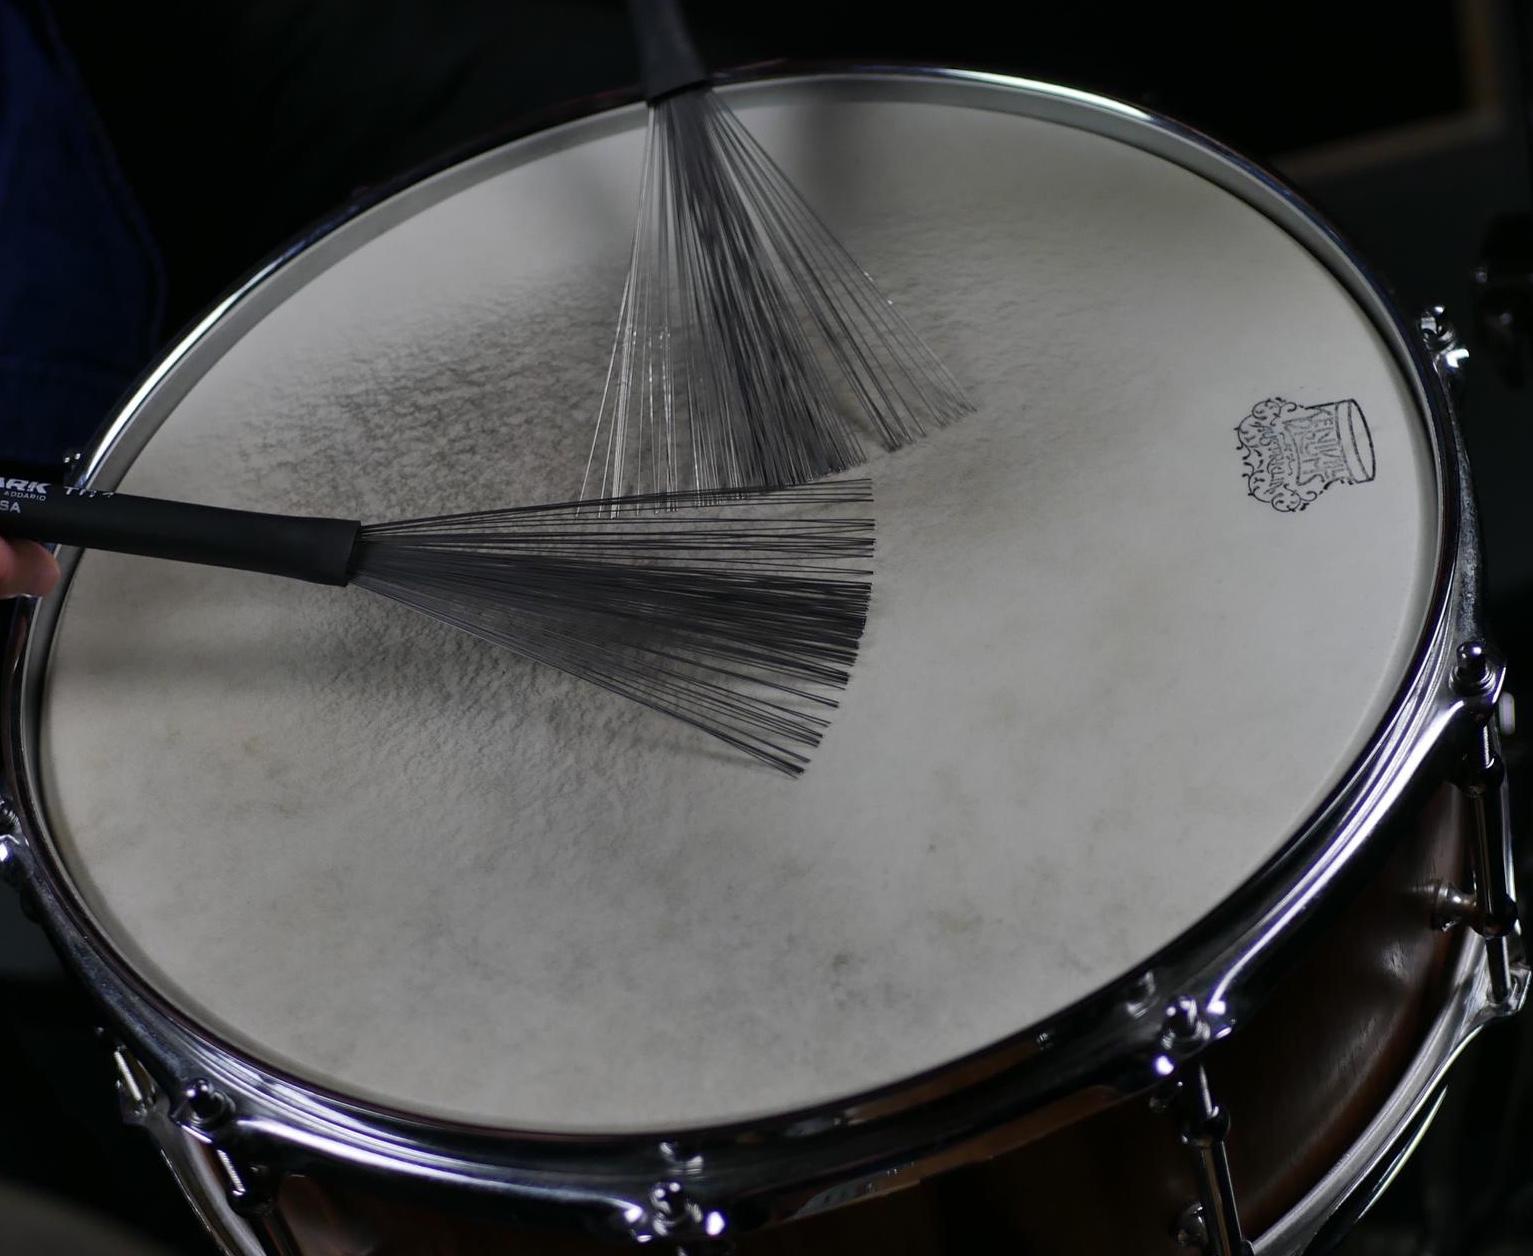 How To Notate Brushes On Drums